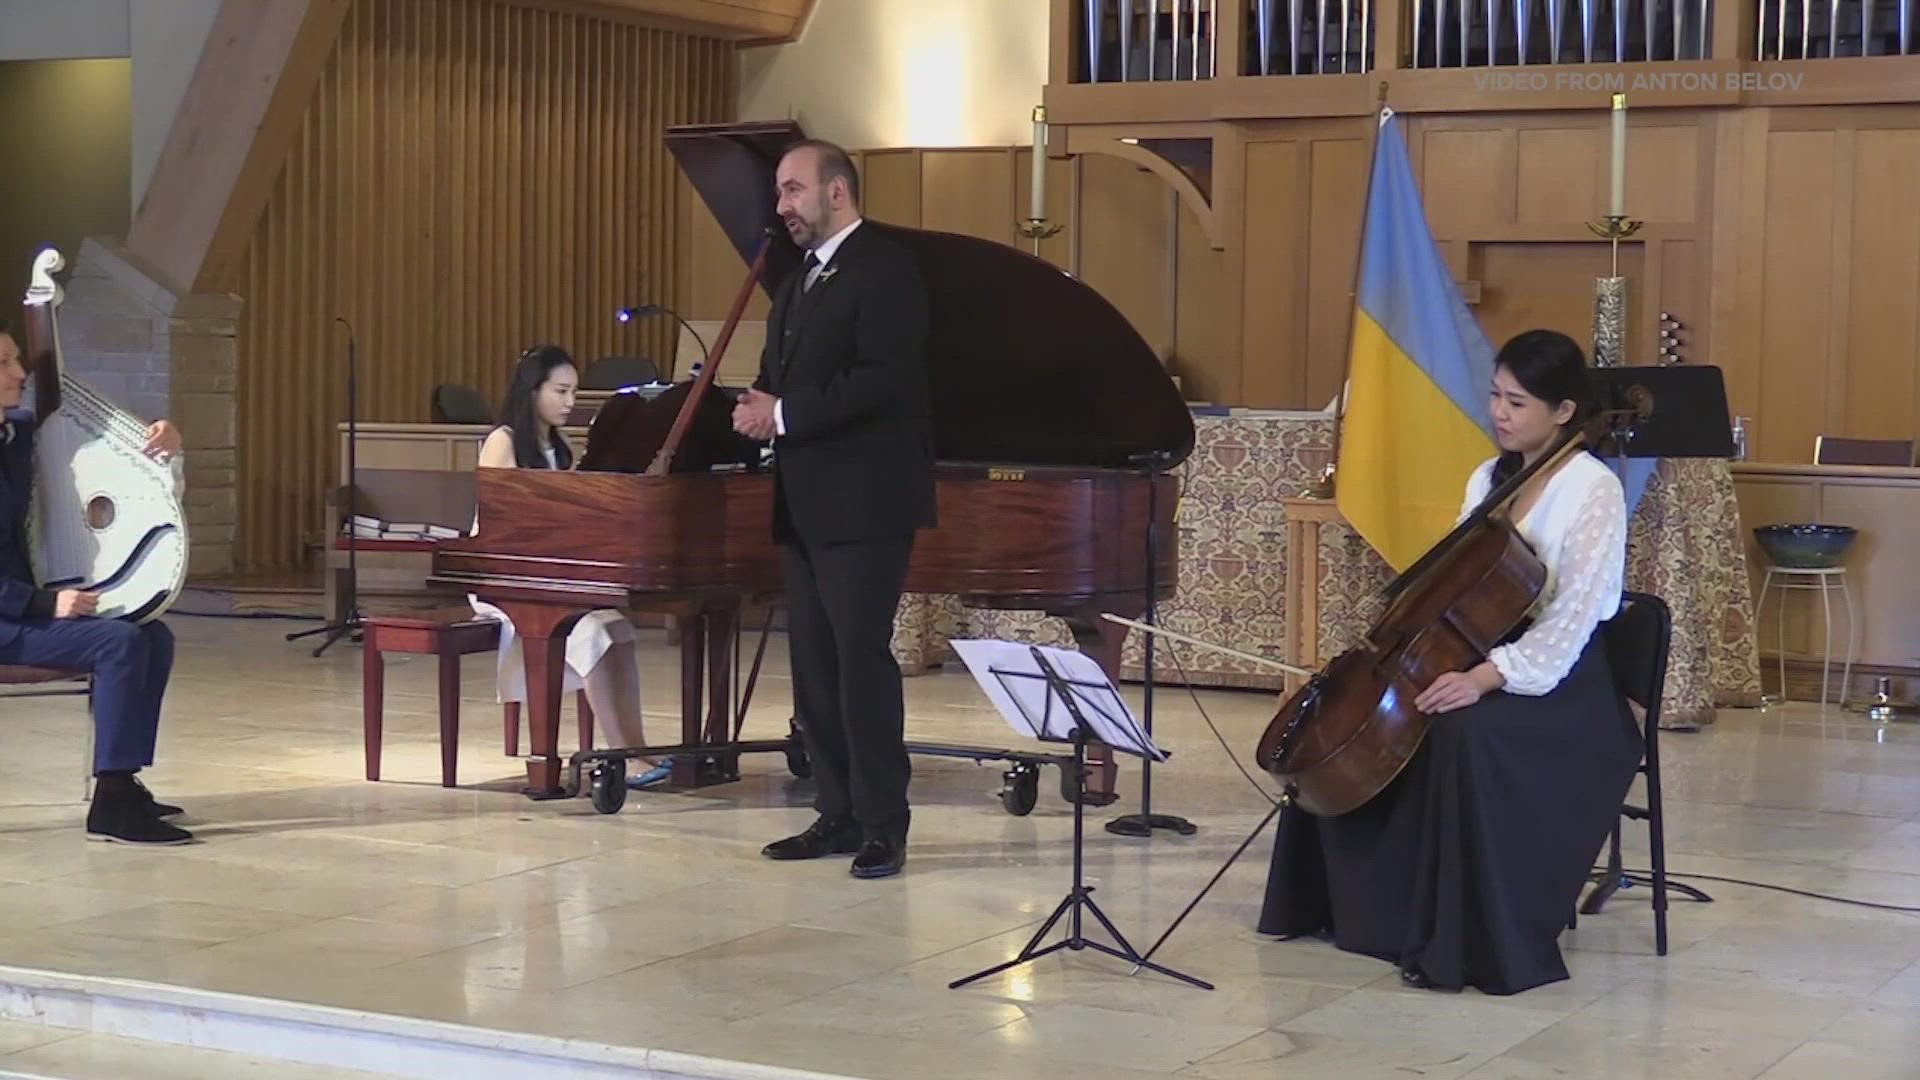 The concert will feature Ukrainian chamber music played with traditional instruments and featuring an international team of musicians.